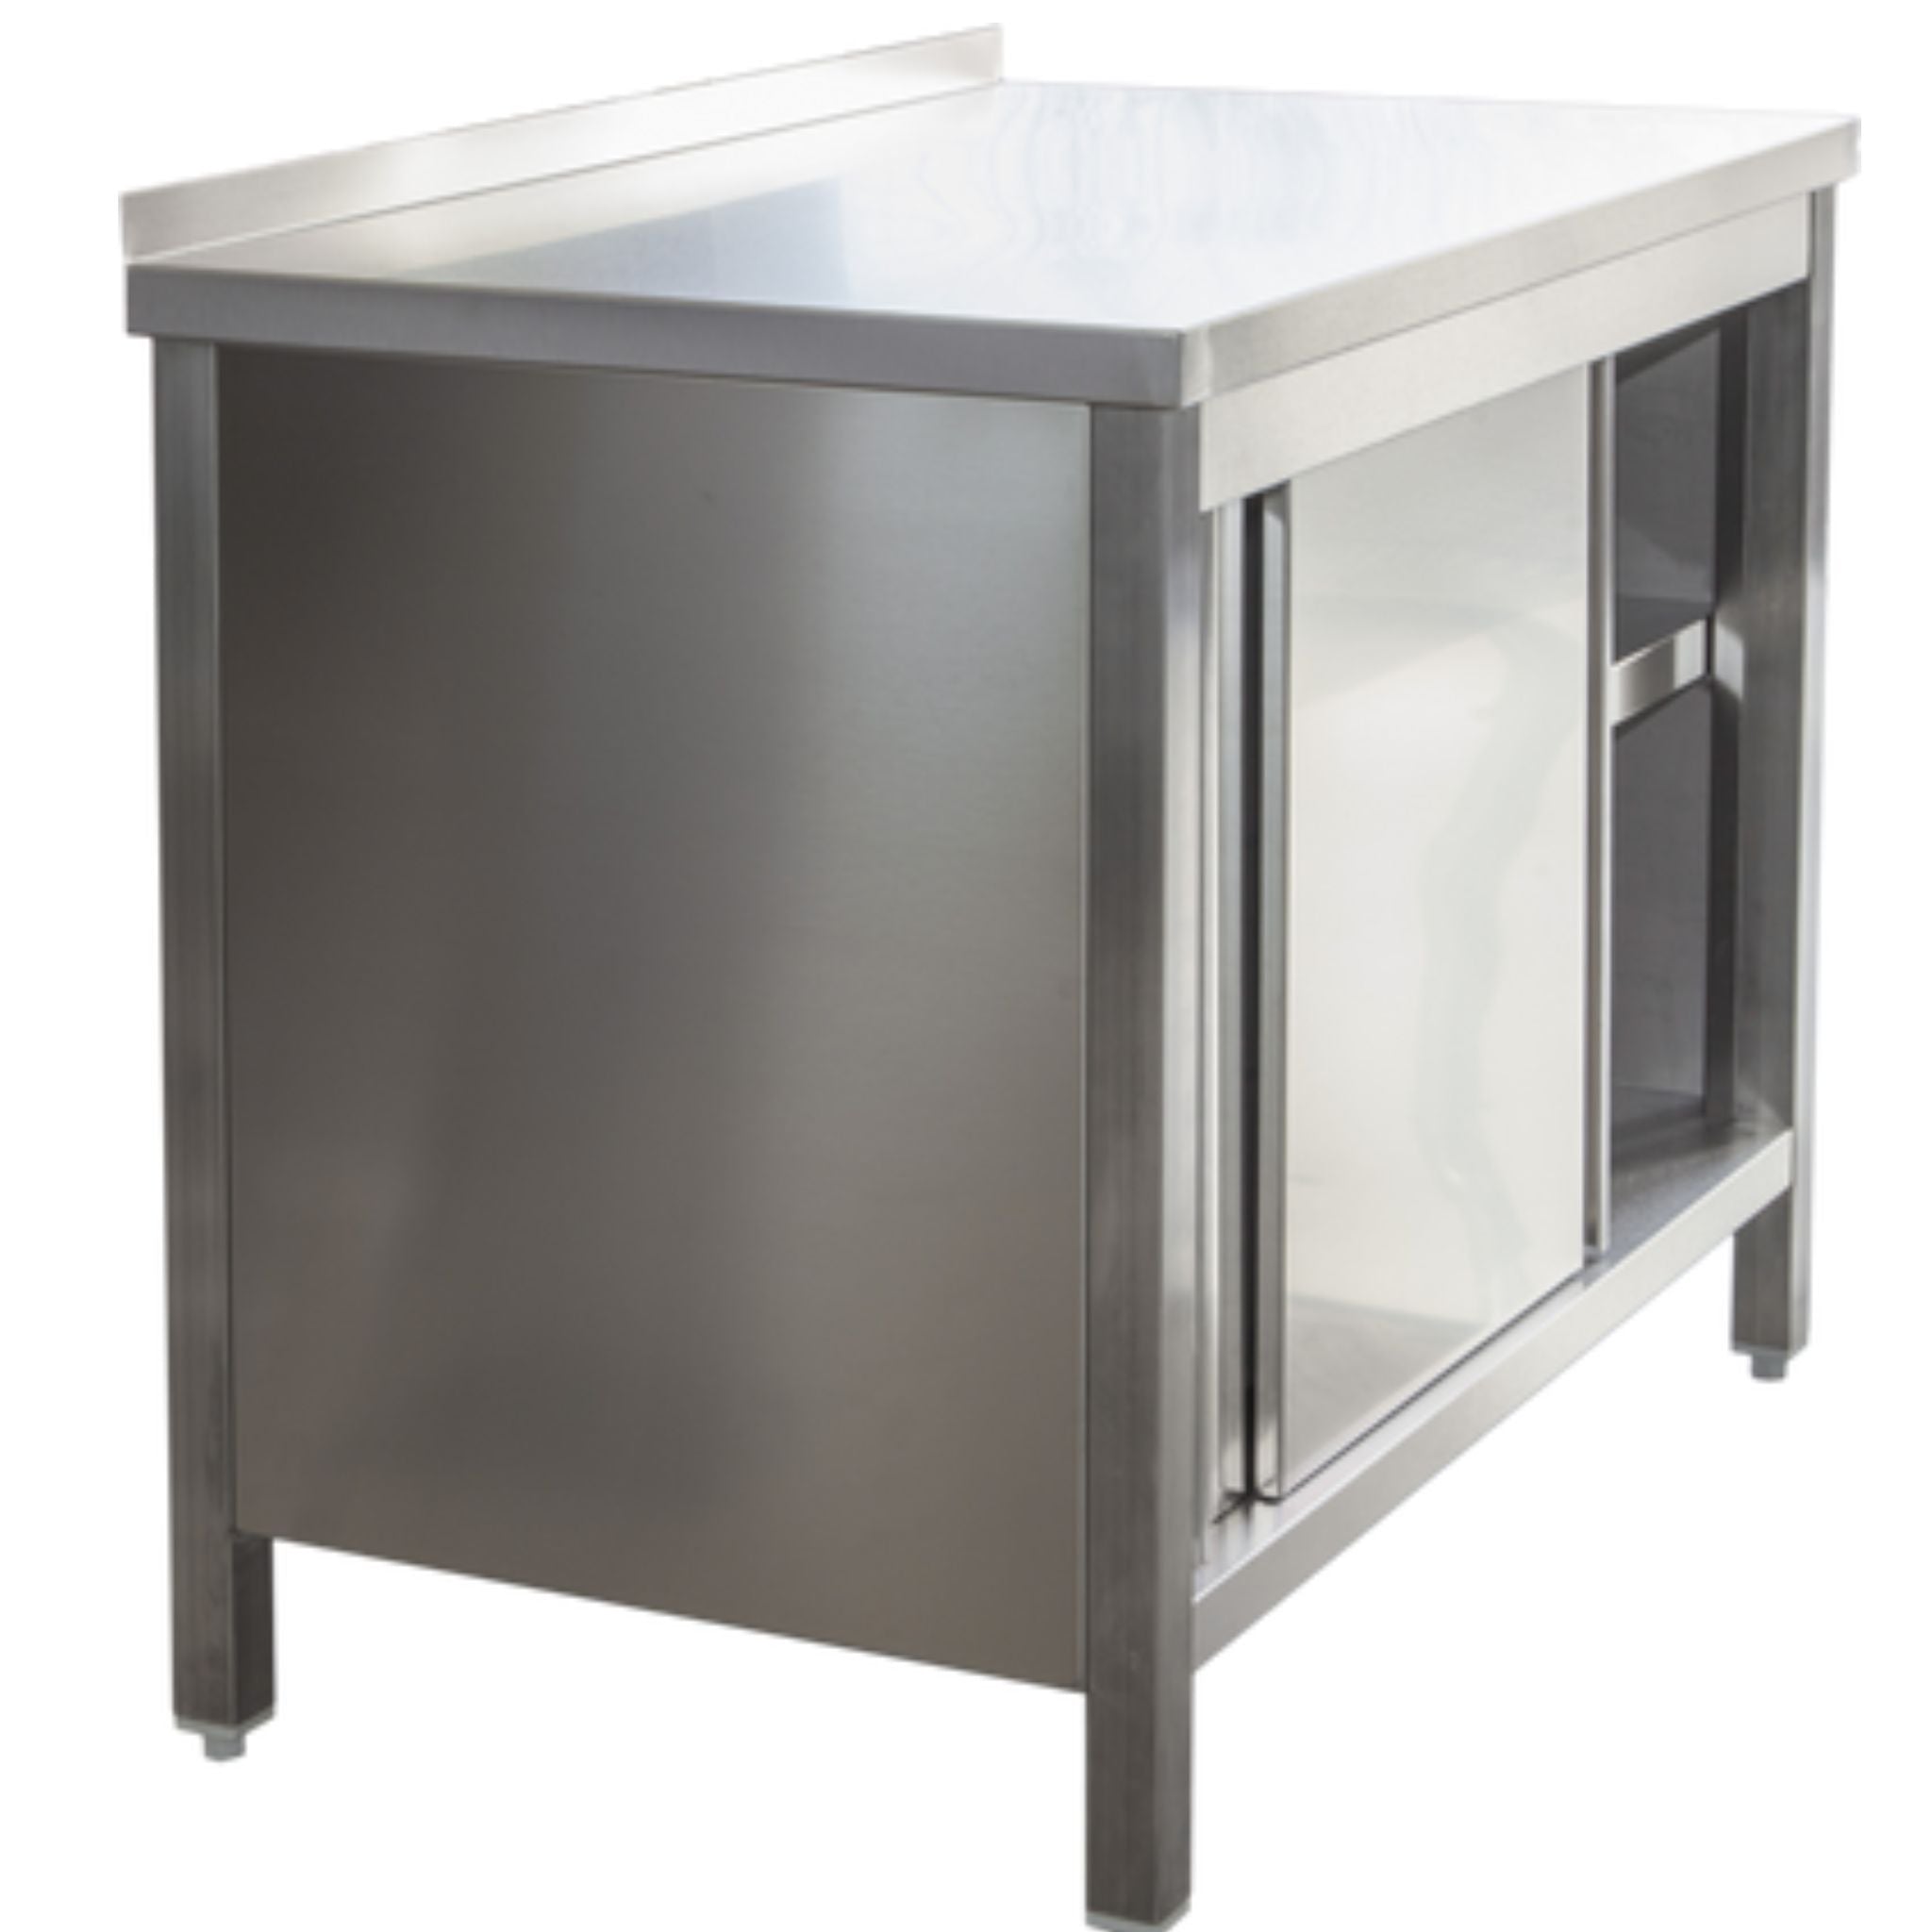 Professional stainless steel work cabinet with sliding doors